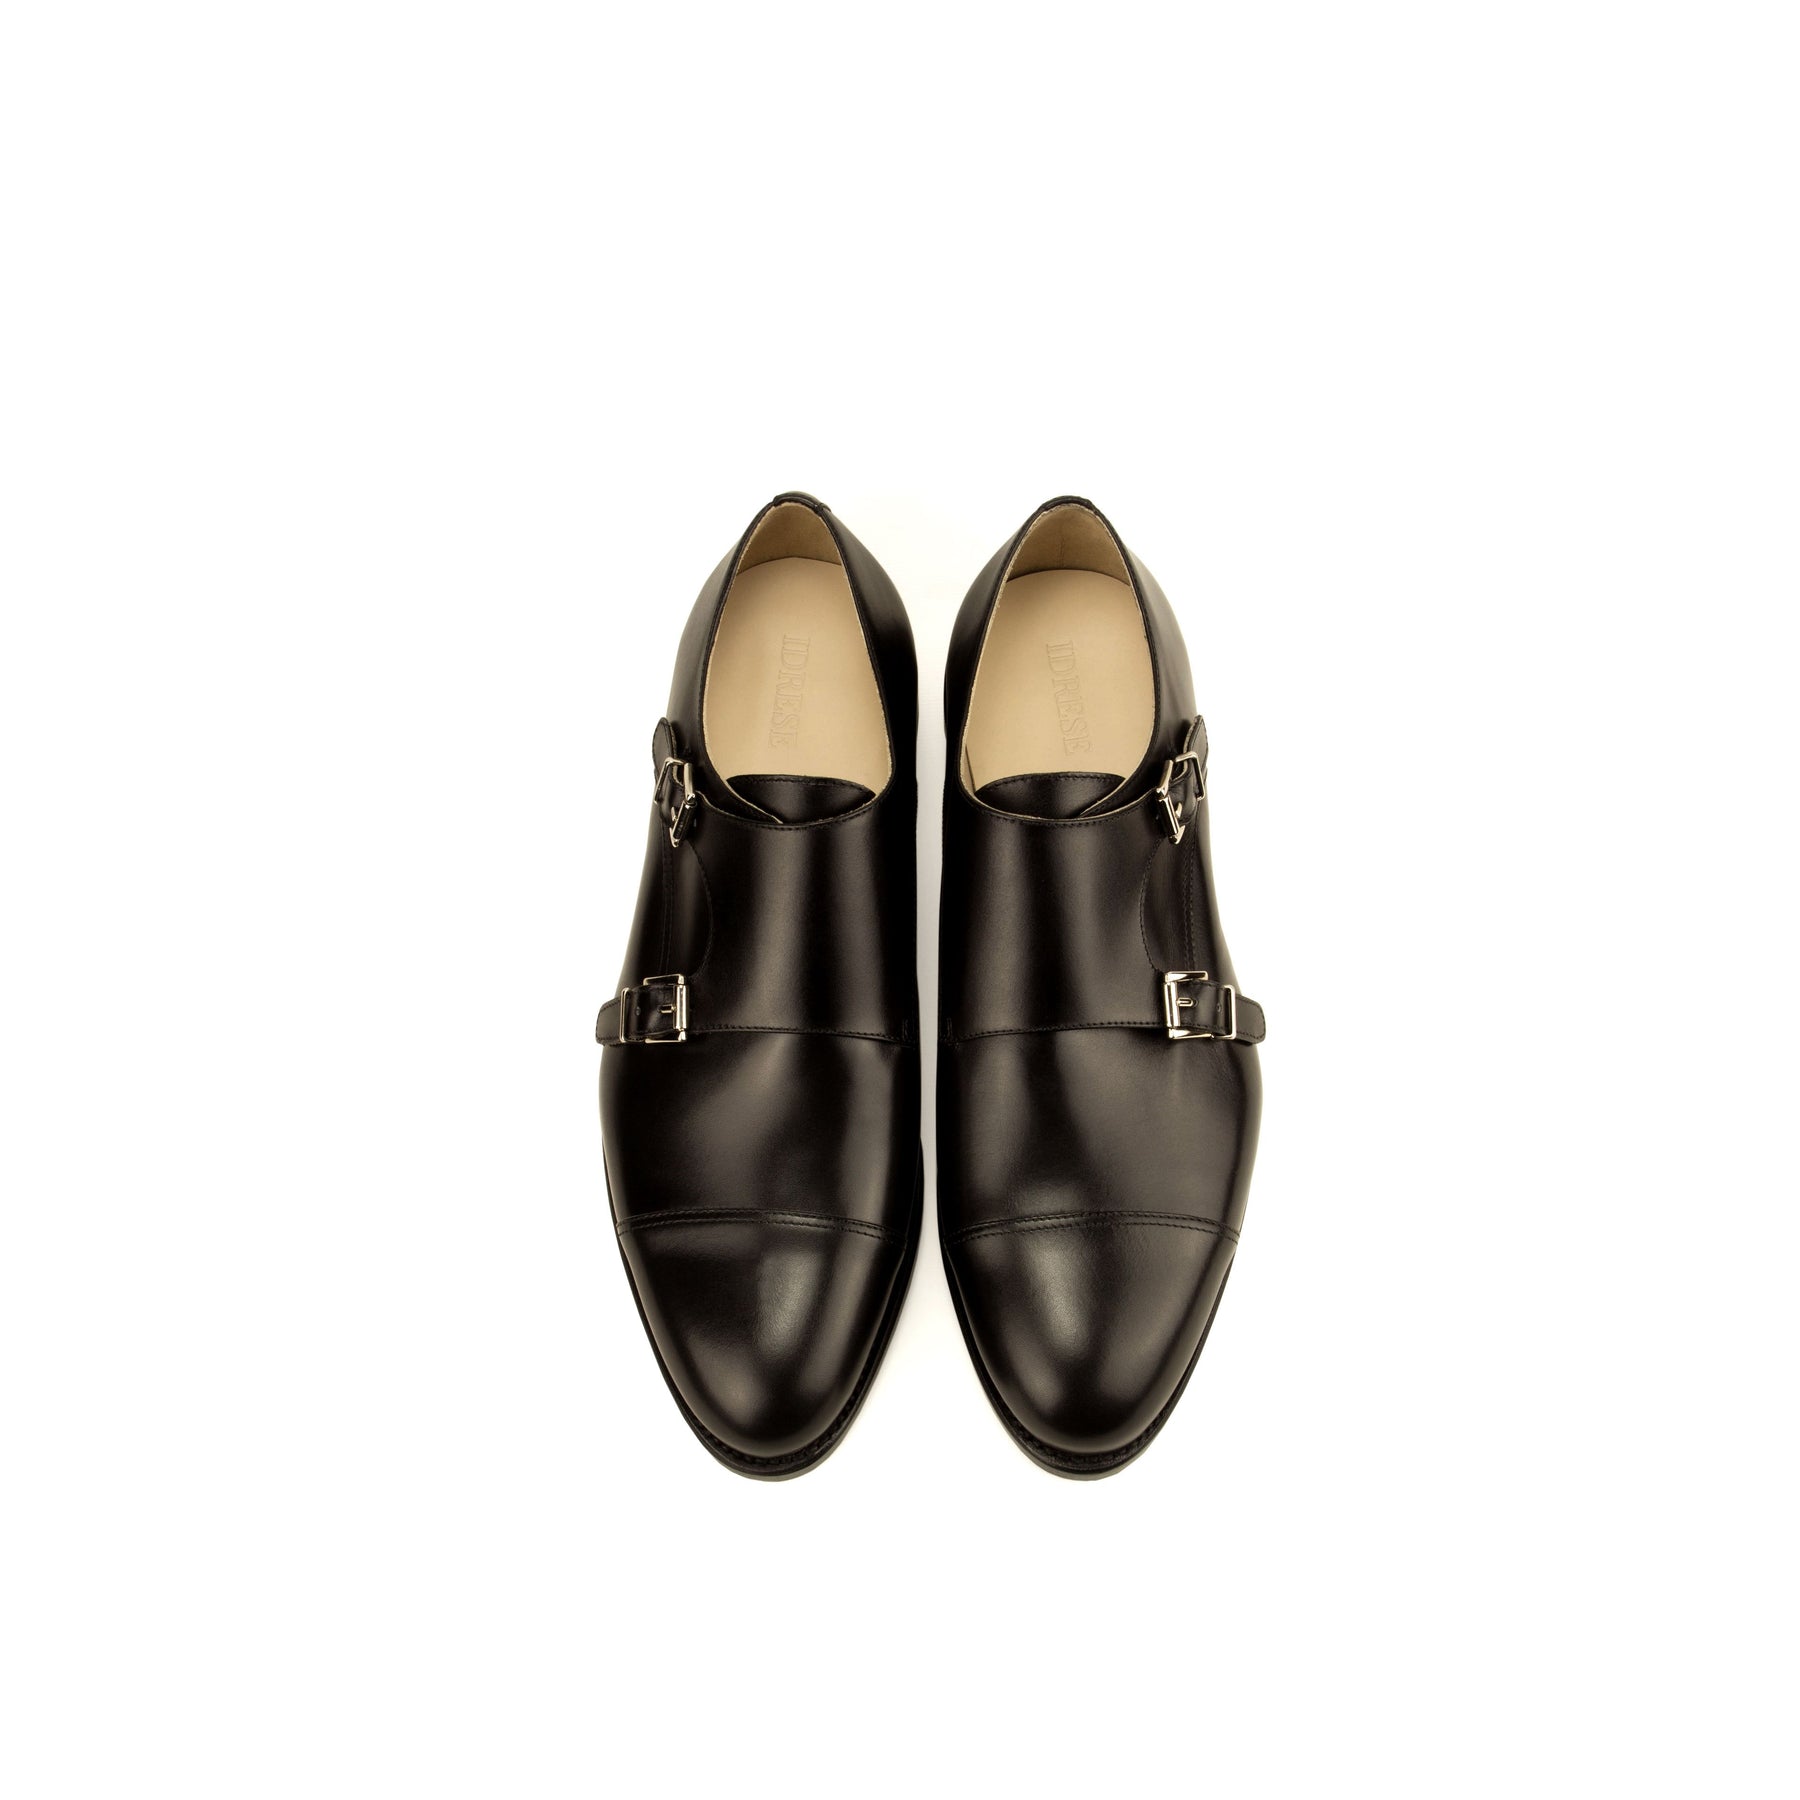 Mens Double Oxblood Monk Strap Shoes - The Morgan by Idrese